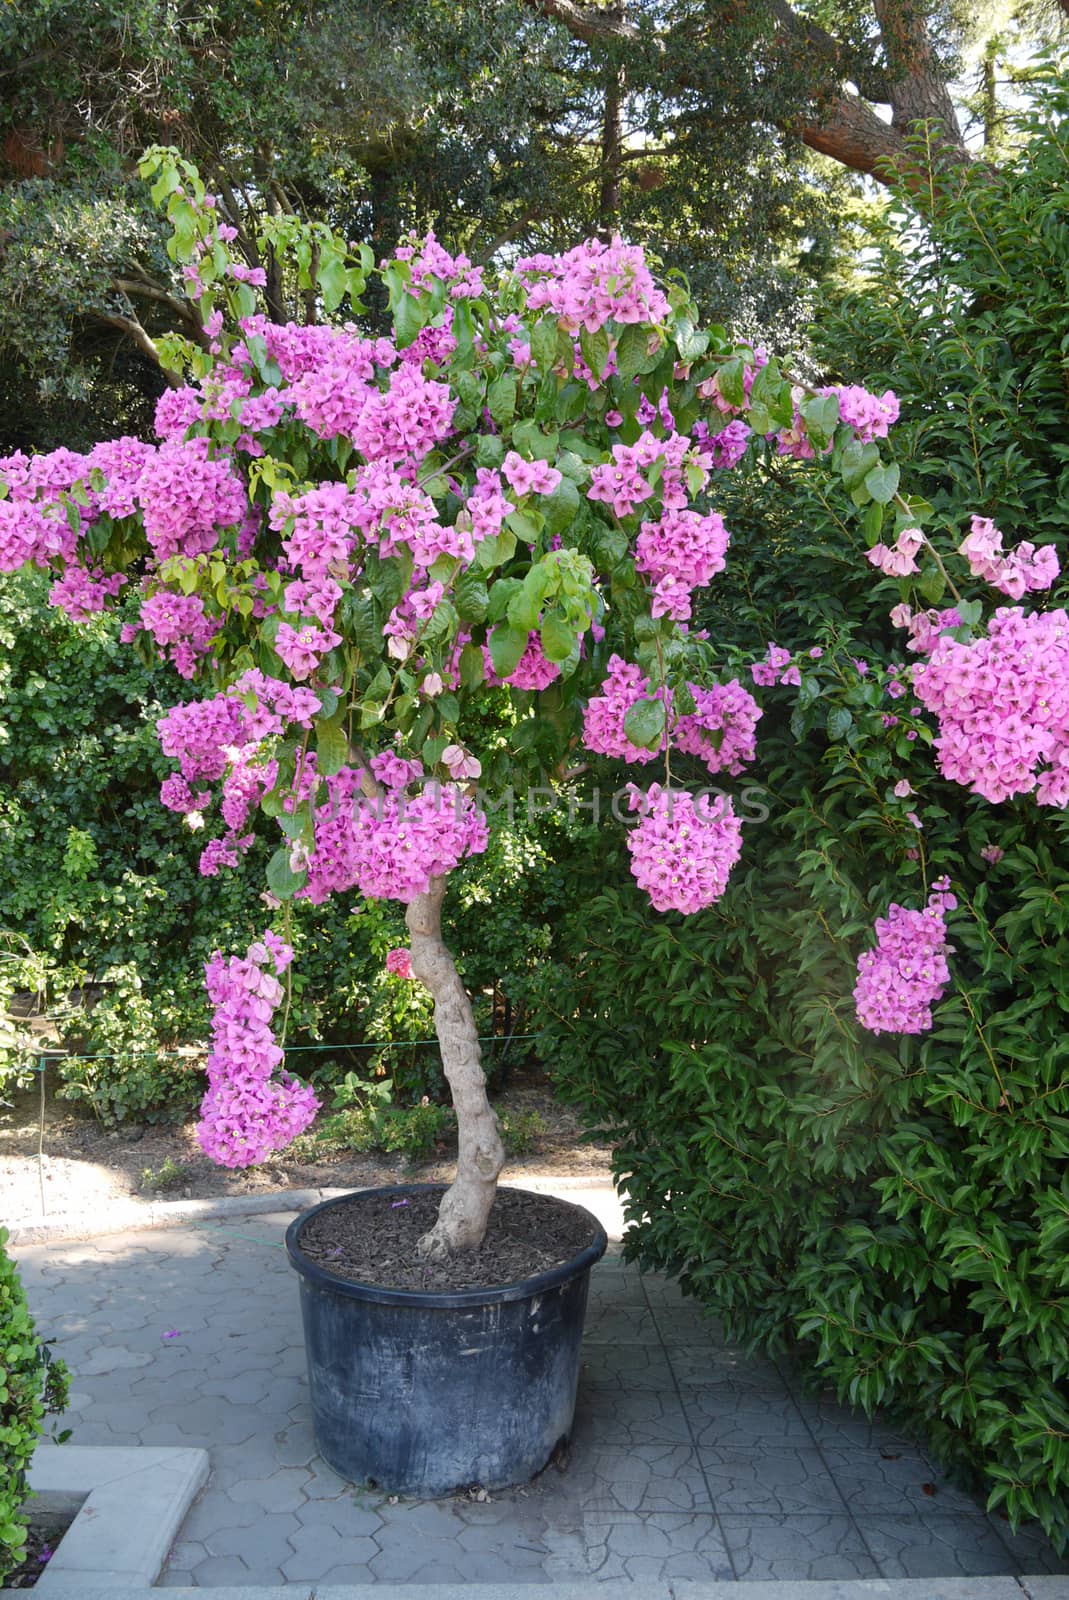 A low flowering tree with pink petals of beautiful buds. It look by Adamchuk